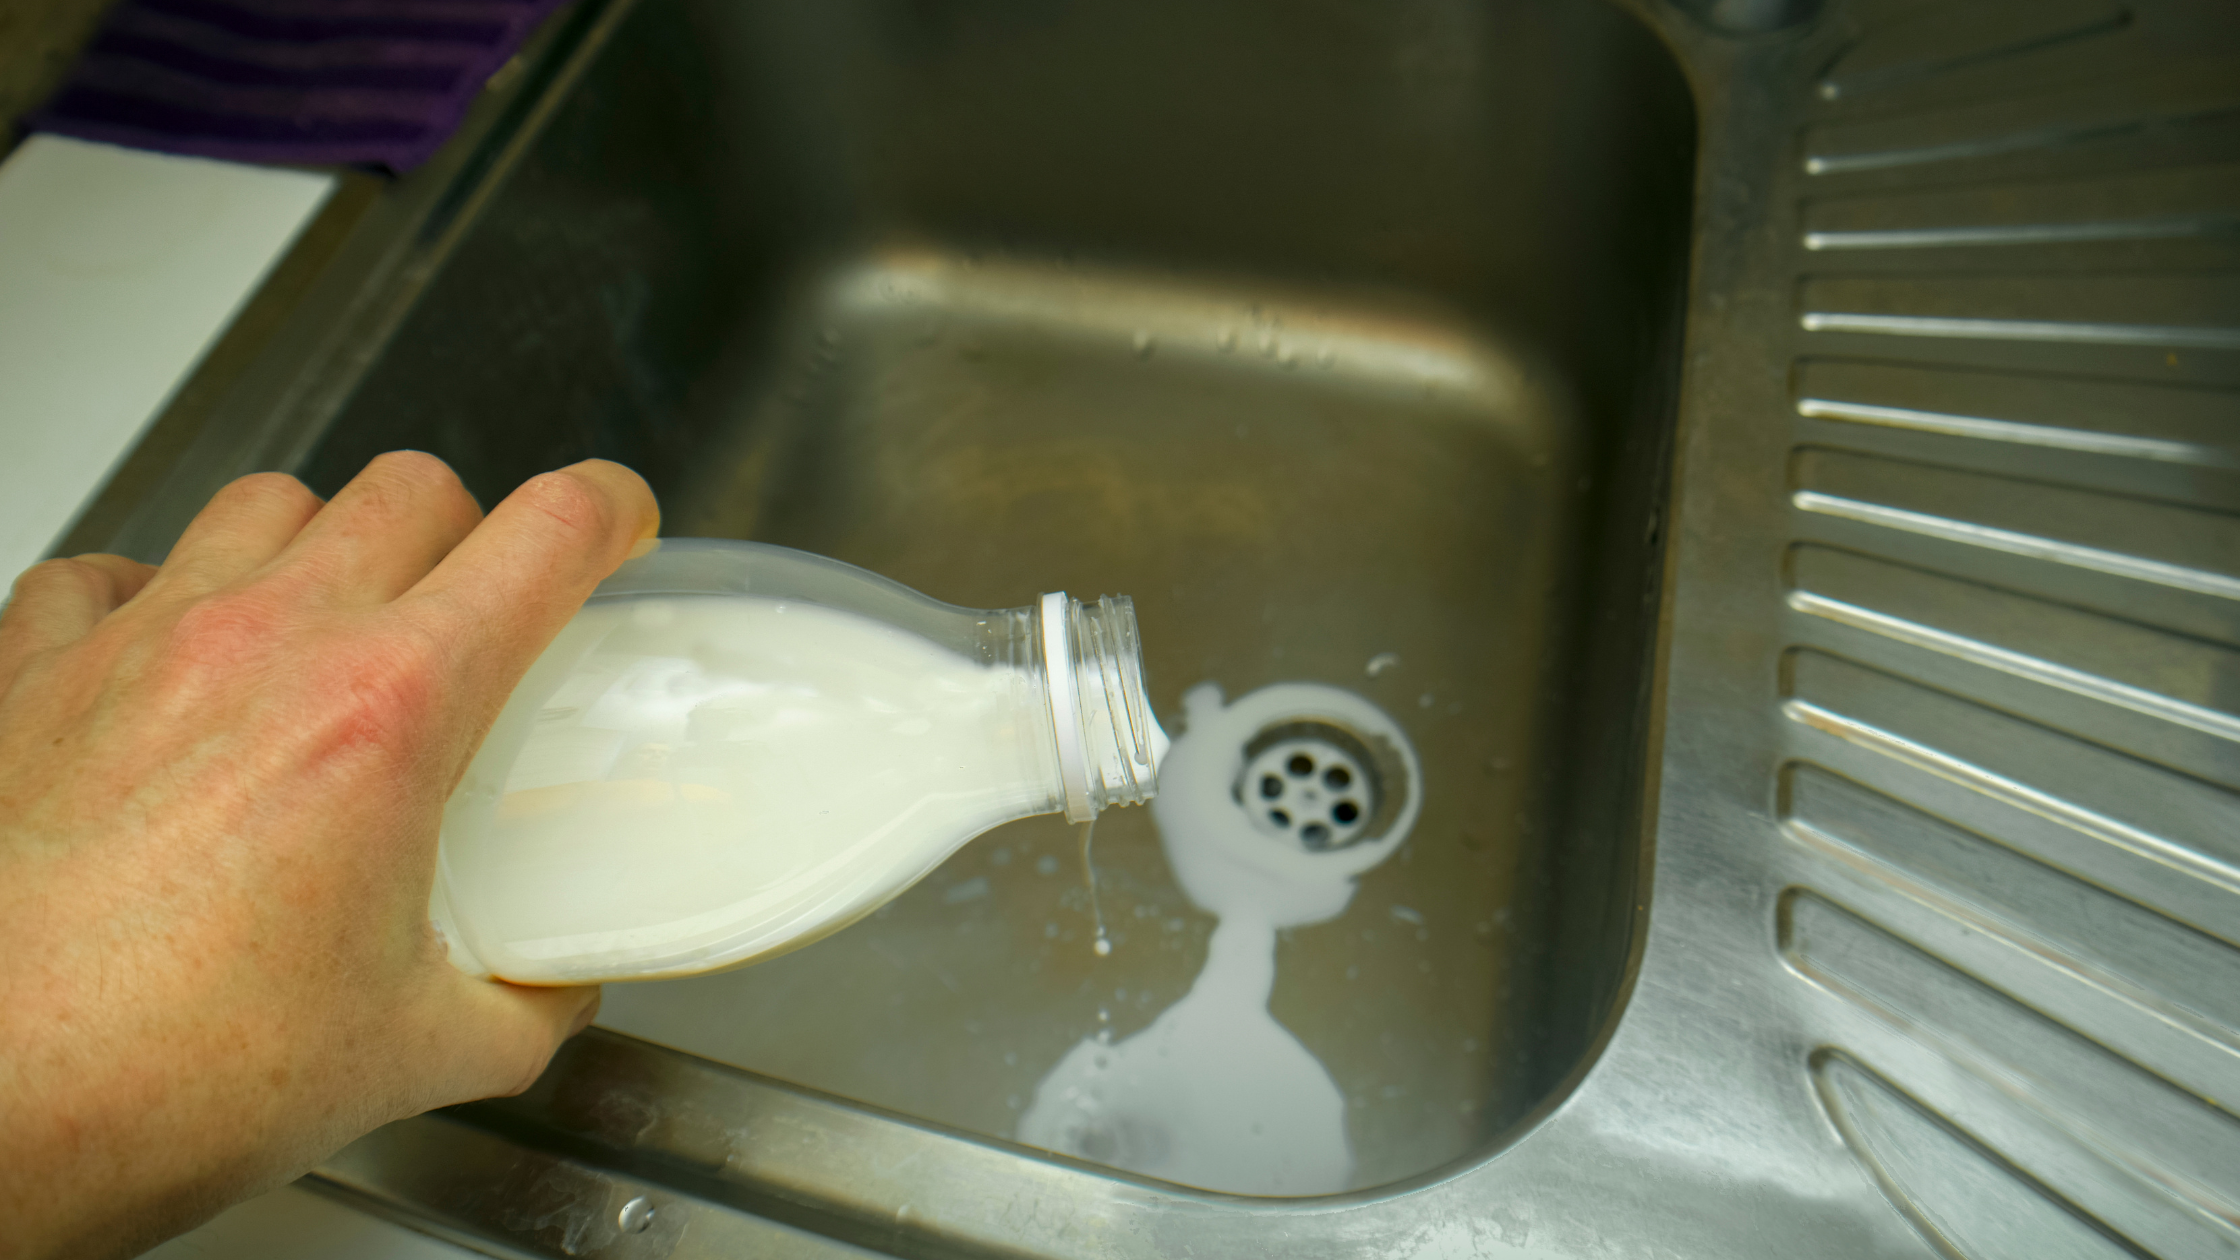 Spoiled milk is poured out in a sink